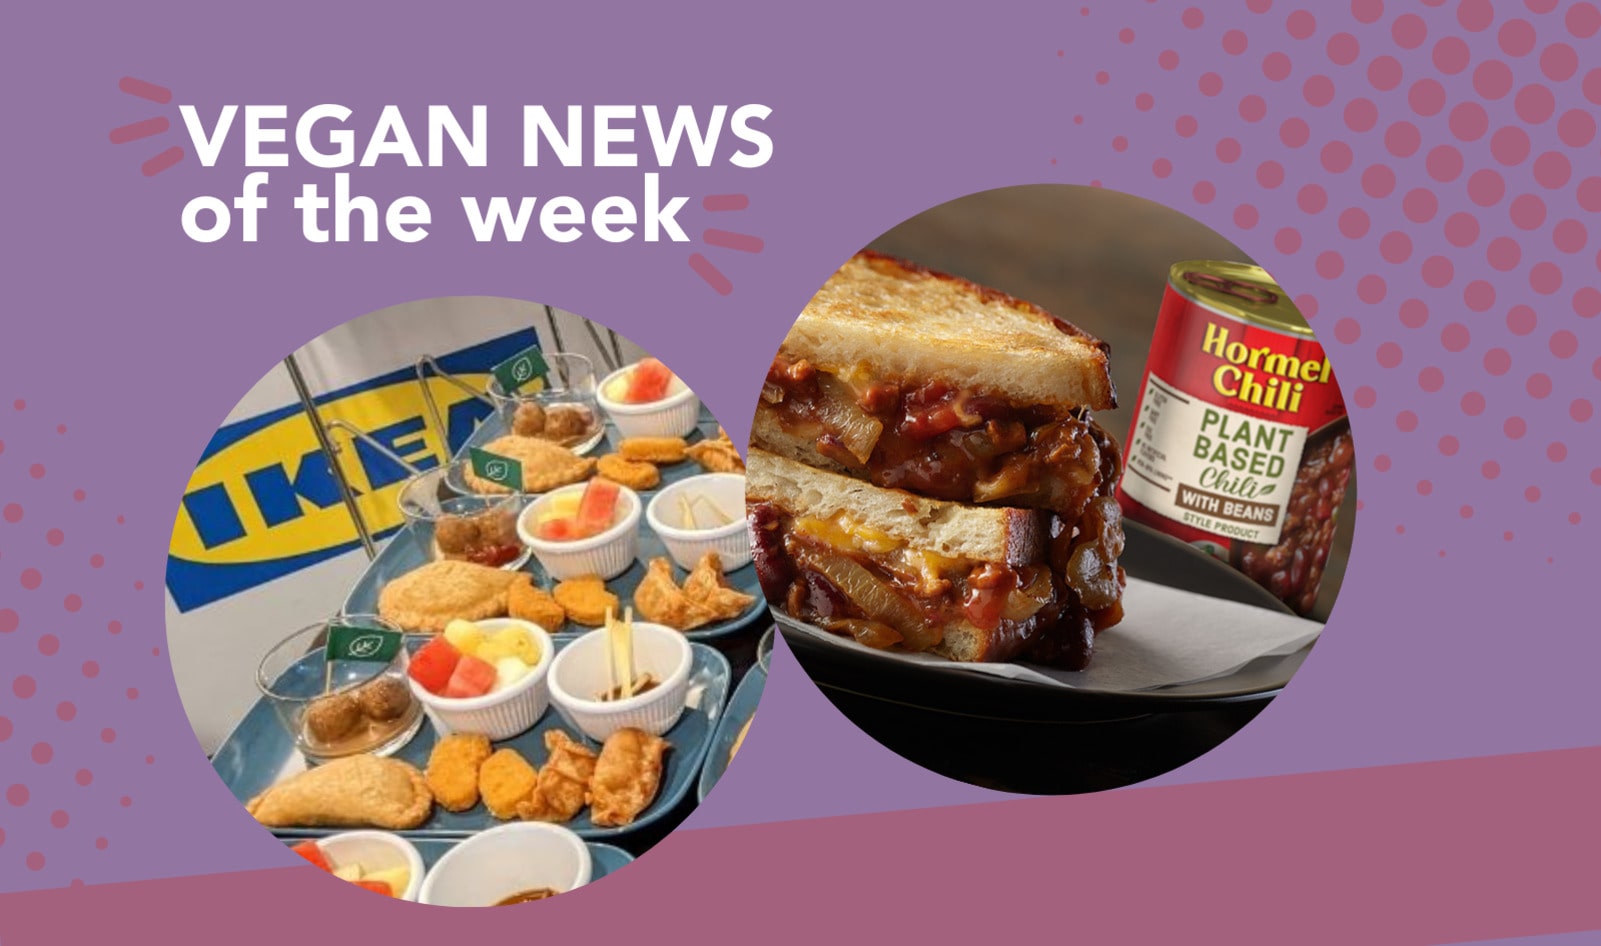 Hormel's Meatless Chili, IKEA's Gyoza, and other Vegan Food News of the Week&nbsp;